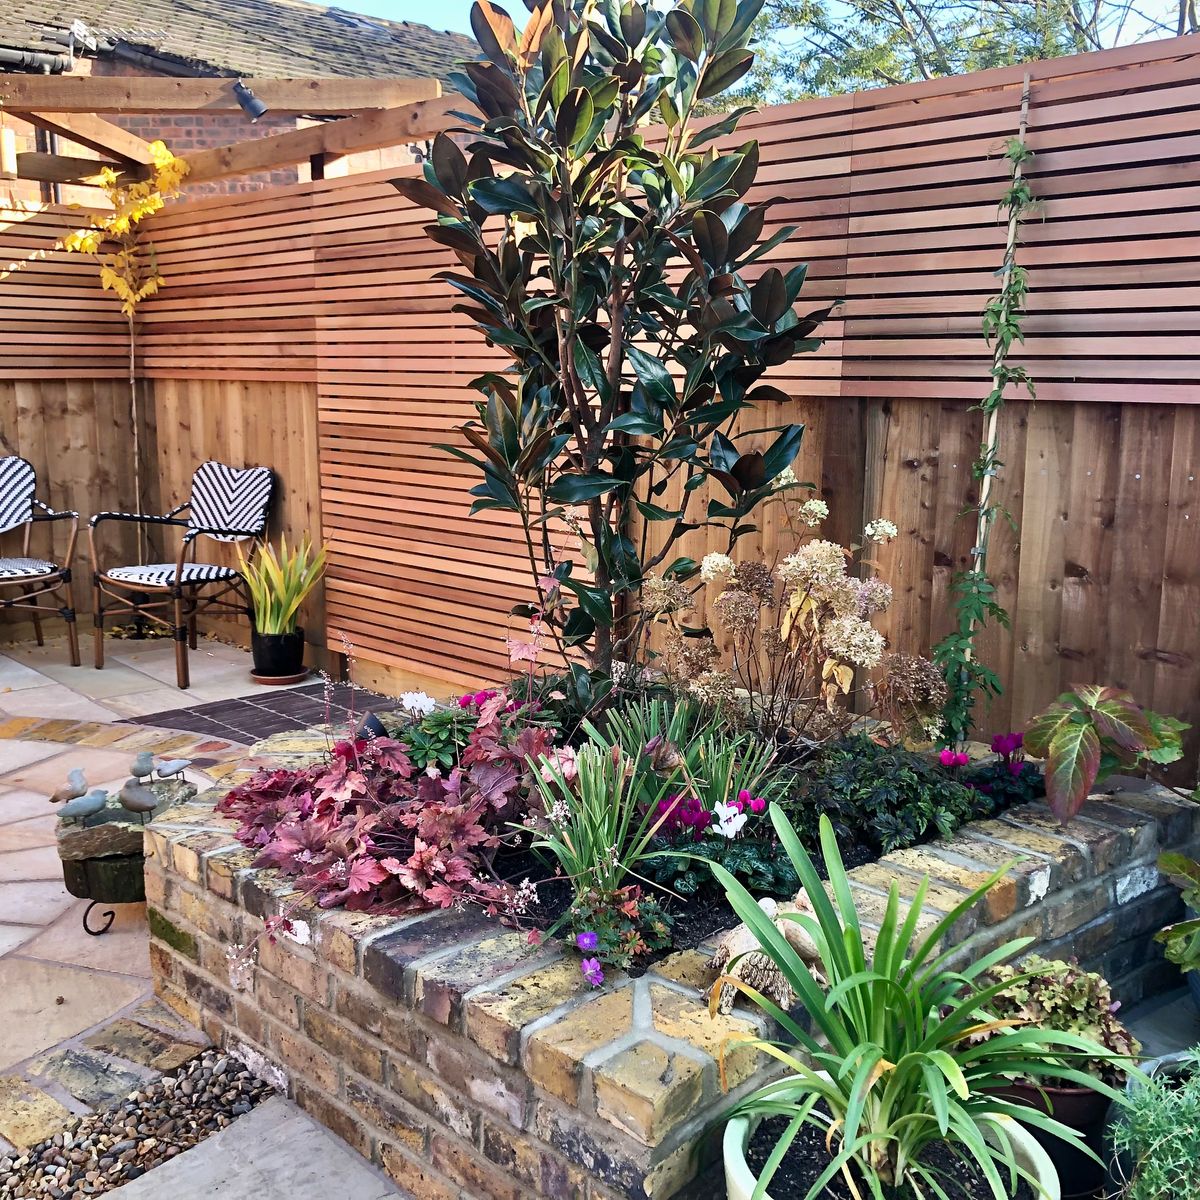 Planting Design Concentrating on Introducing Different Heights and Colours to Brick Planters in Beautiful Small Garden Found in Dalston North London